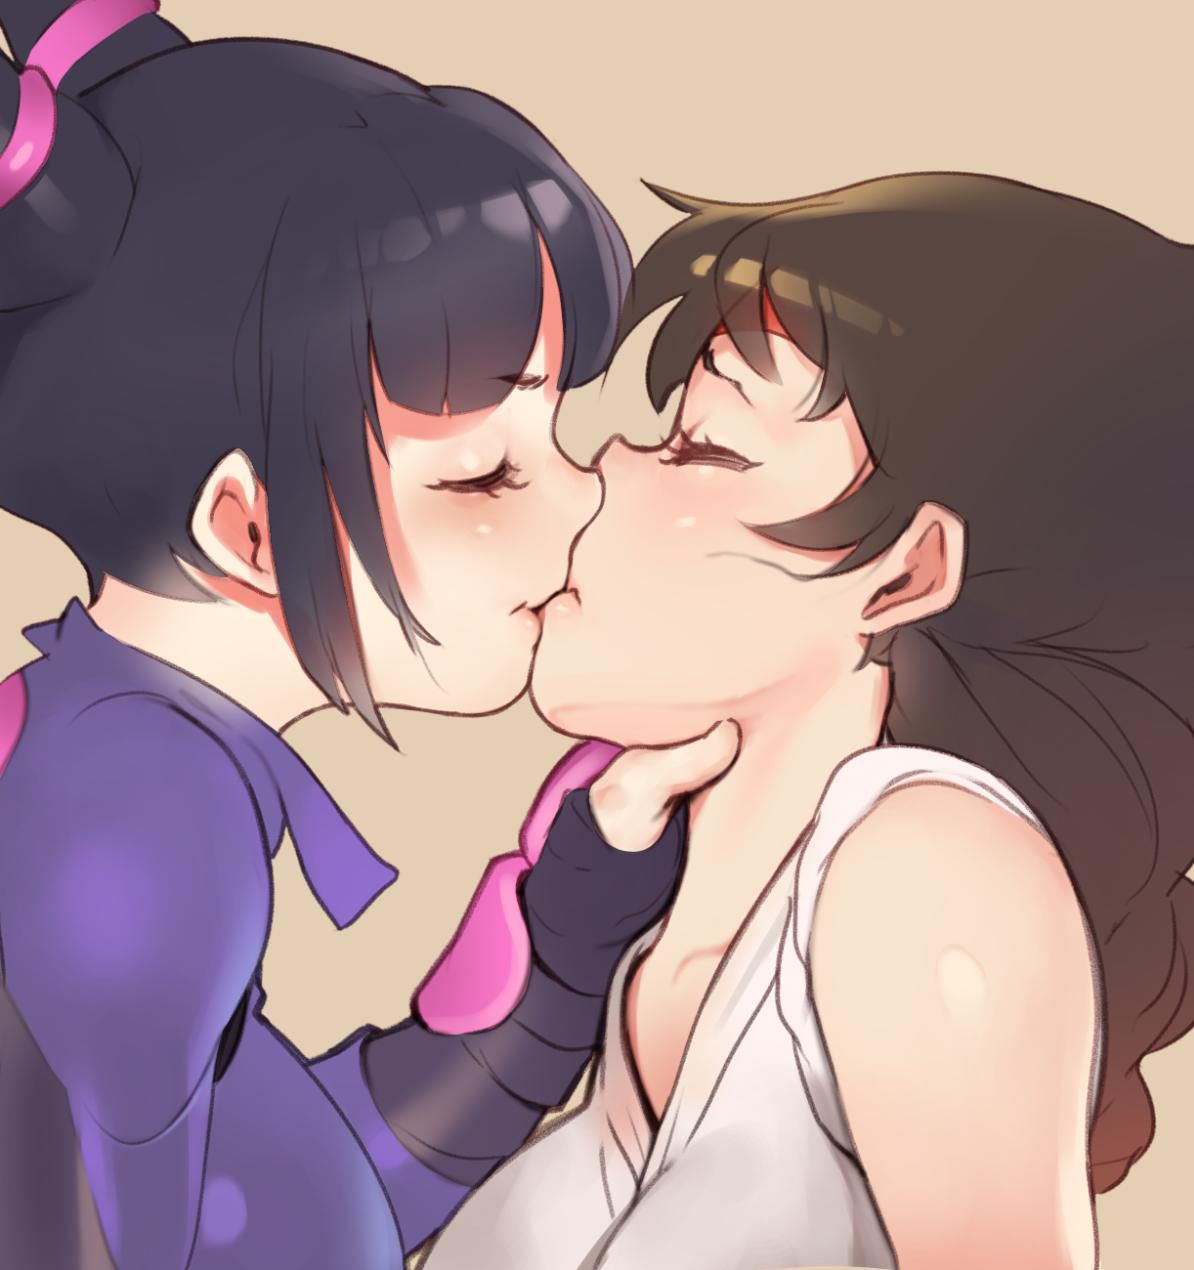 I envy you. Mix me too! Yuri two-dimensional erotic image between girls who are relentless in Lezplay 34